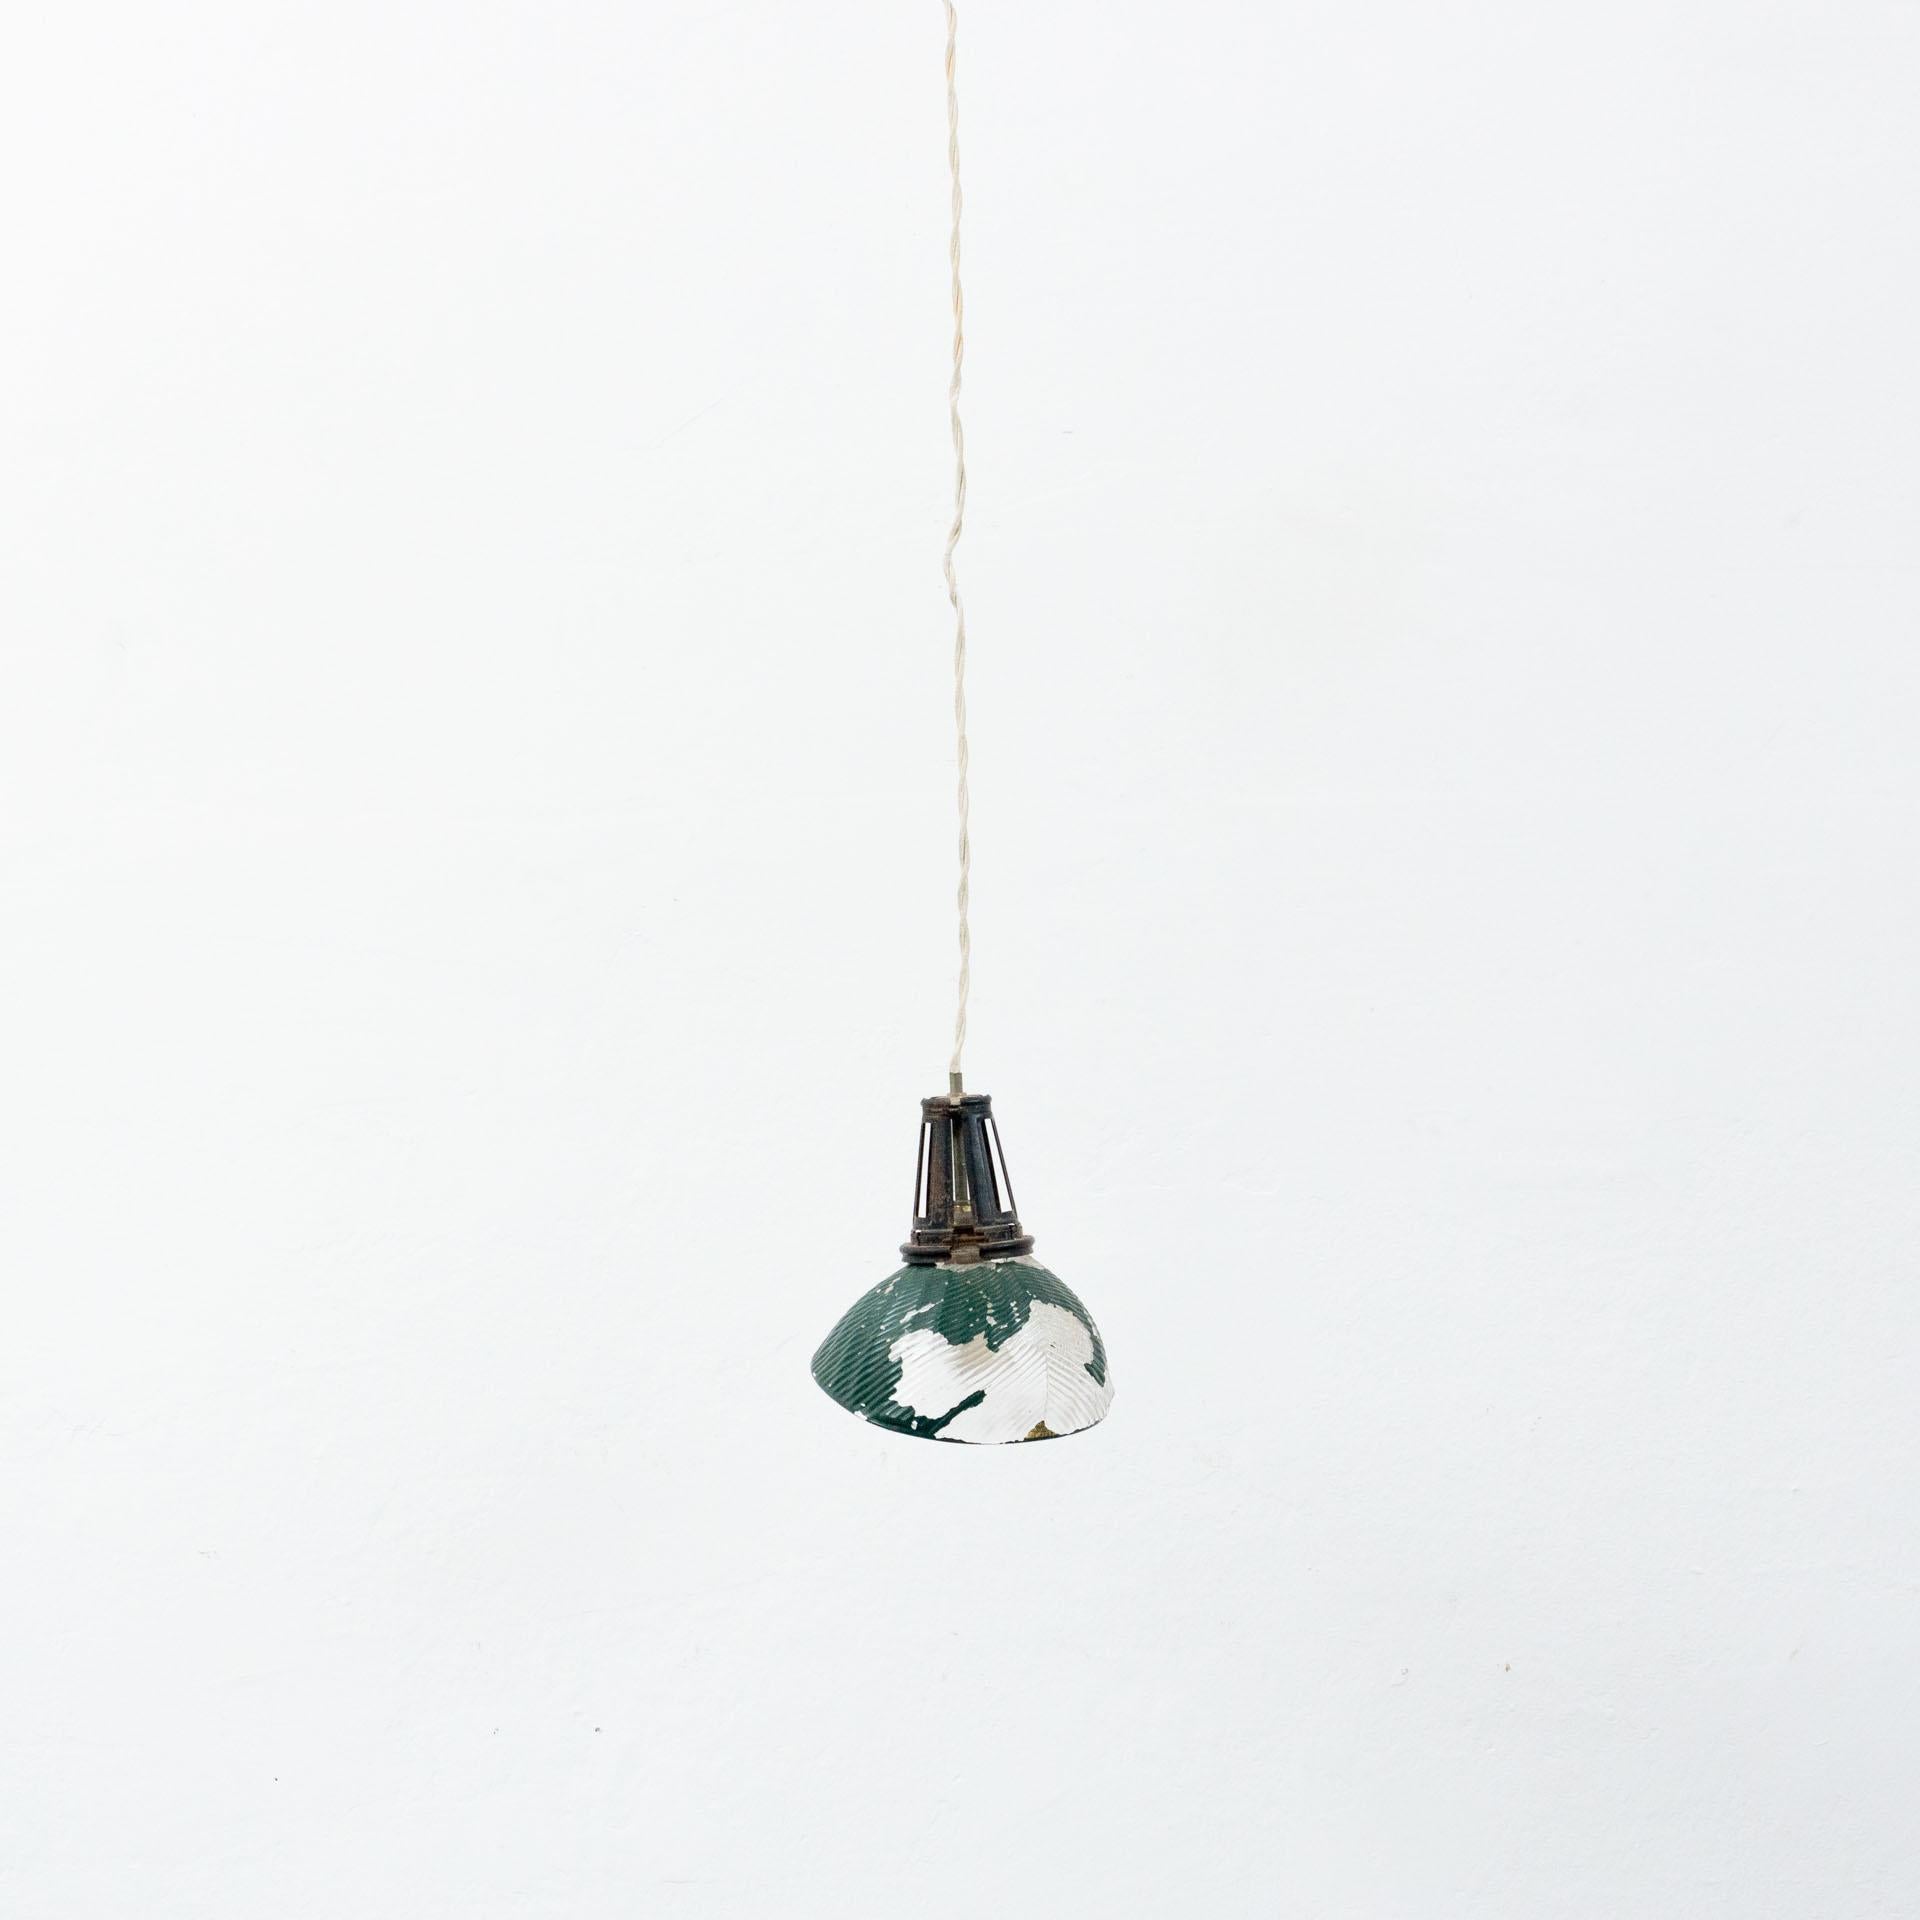 French vintage green glass ceiling lamp.
By unknown manufacturer from France, circa 1940.

In original condition, with minor wear consistent with age and use, preserving a beautiful patina.

Materials:
Glass
Metal

Dimensions:
D 20.5 cm x